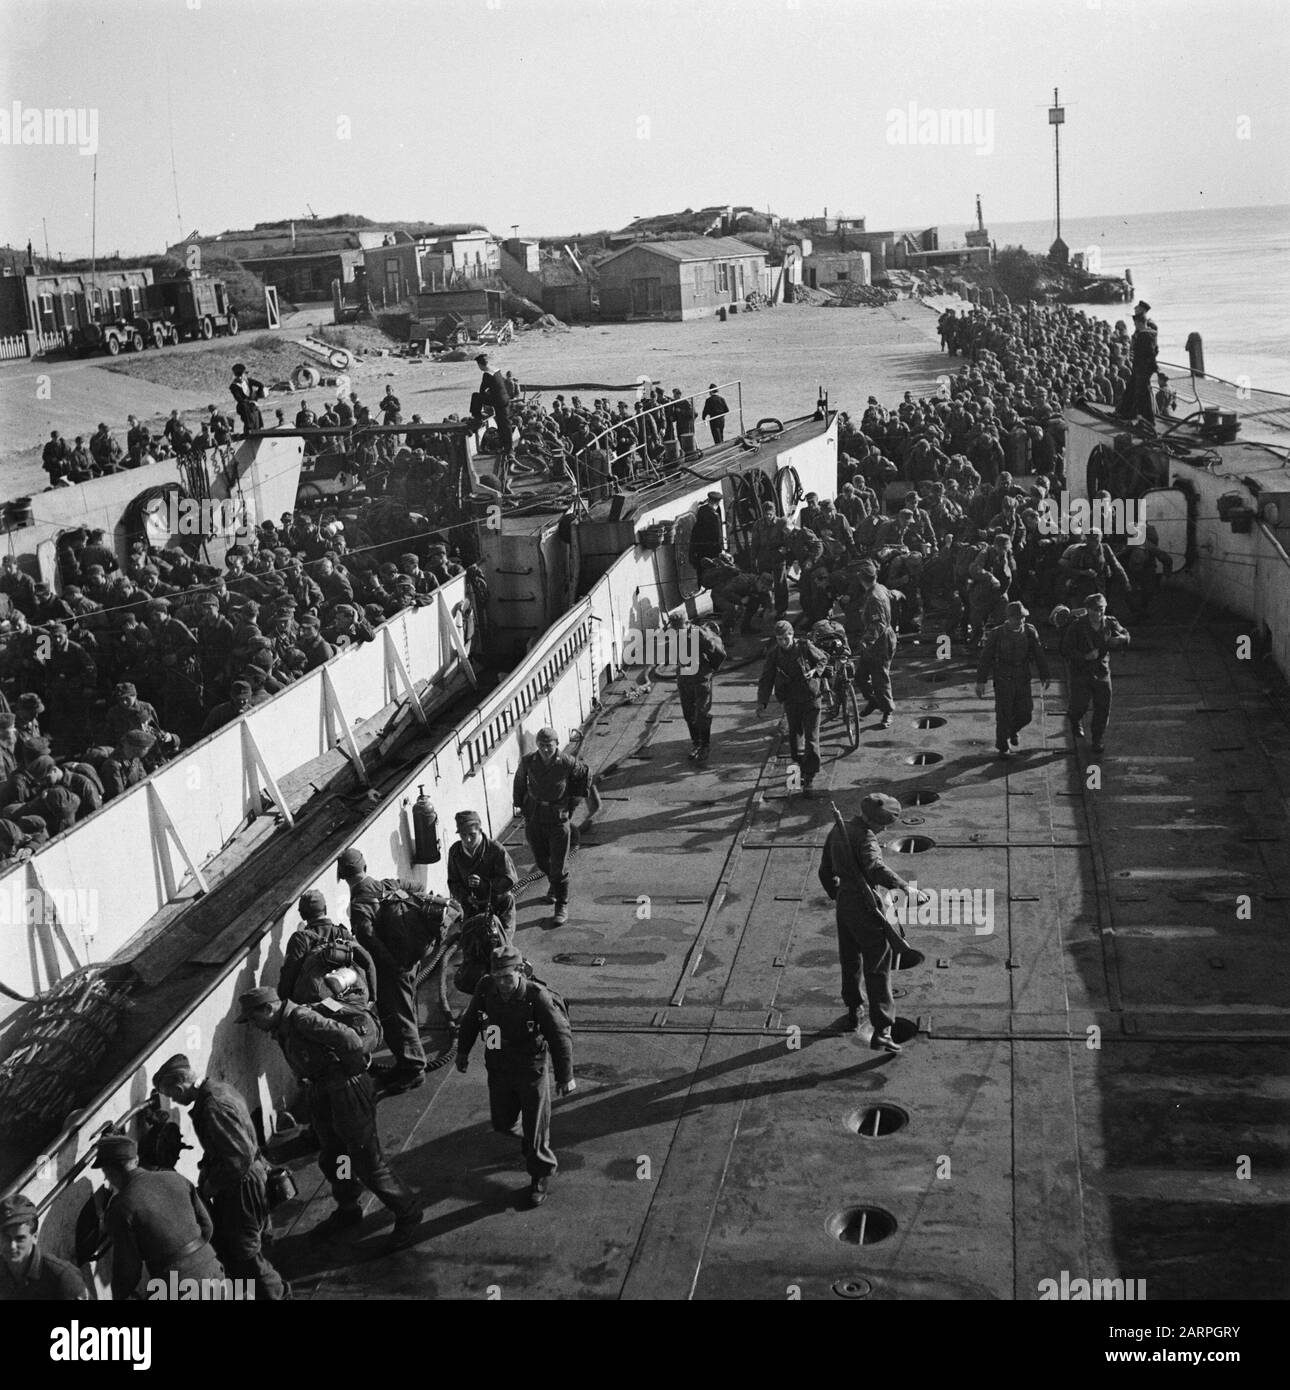 Capitulation: Den Helder  In Den Helder, the disarmed German soldiers are embarked in LCT boats for Harlingen, from where the long journey to the Heimat is made on foot. Date: 1945 Location: Den Helder Keywords: prisoners of war, ships, World War II Stock Photo